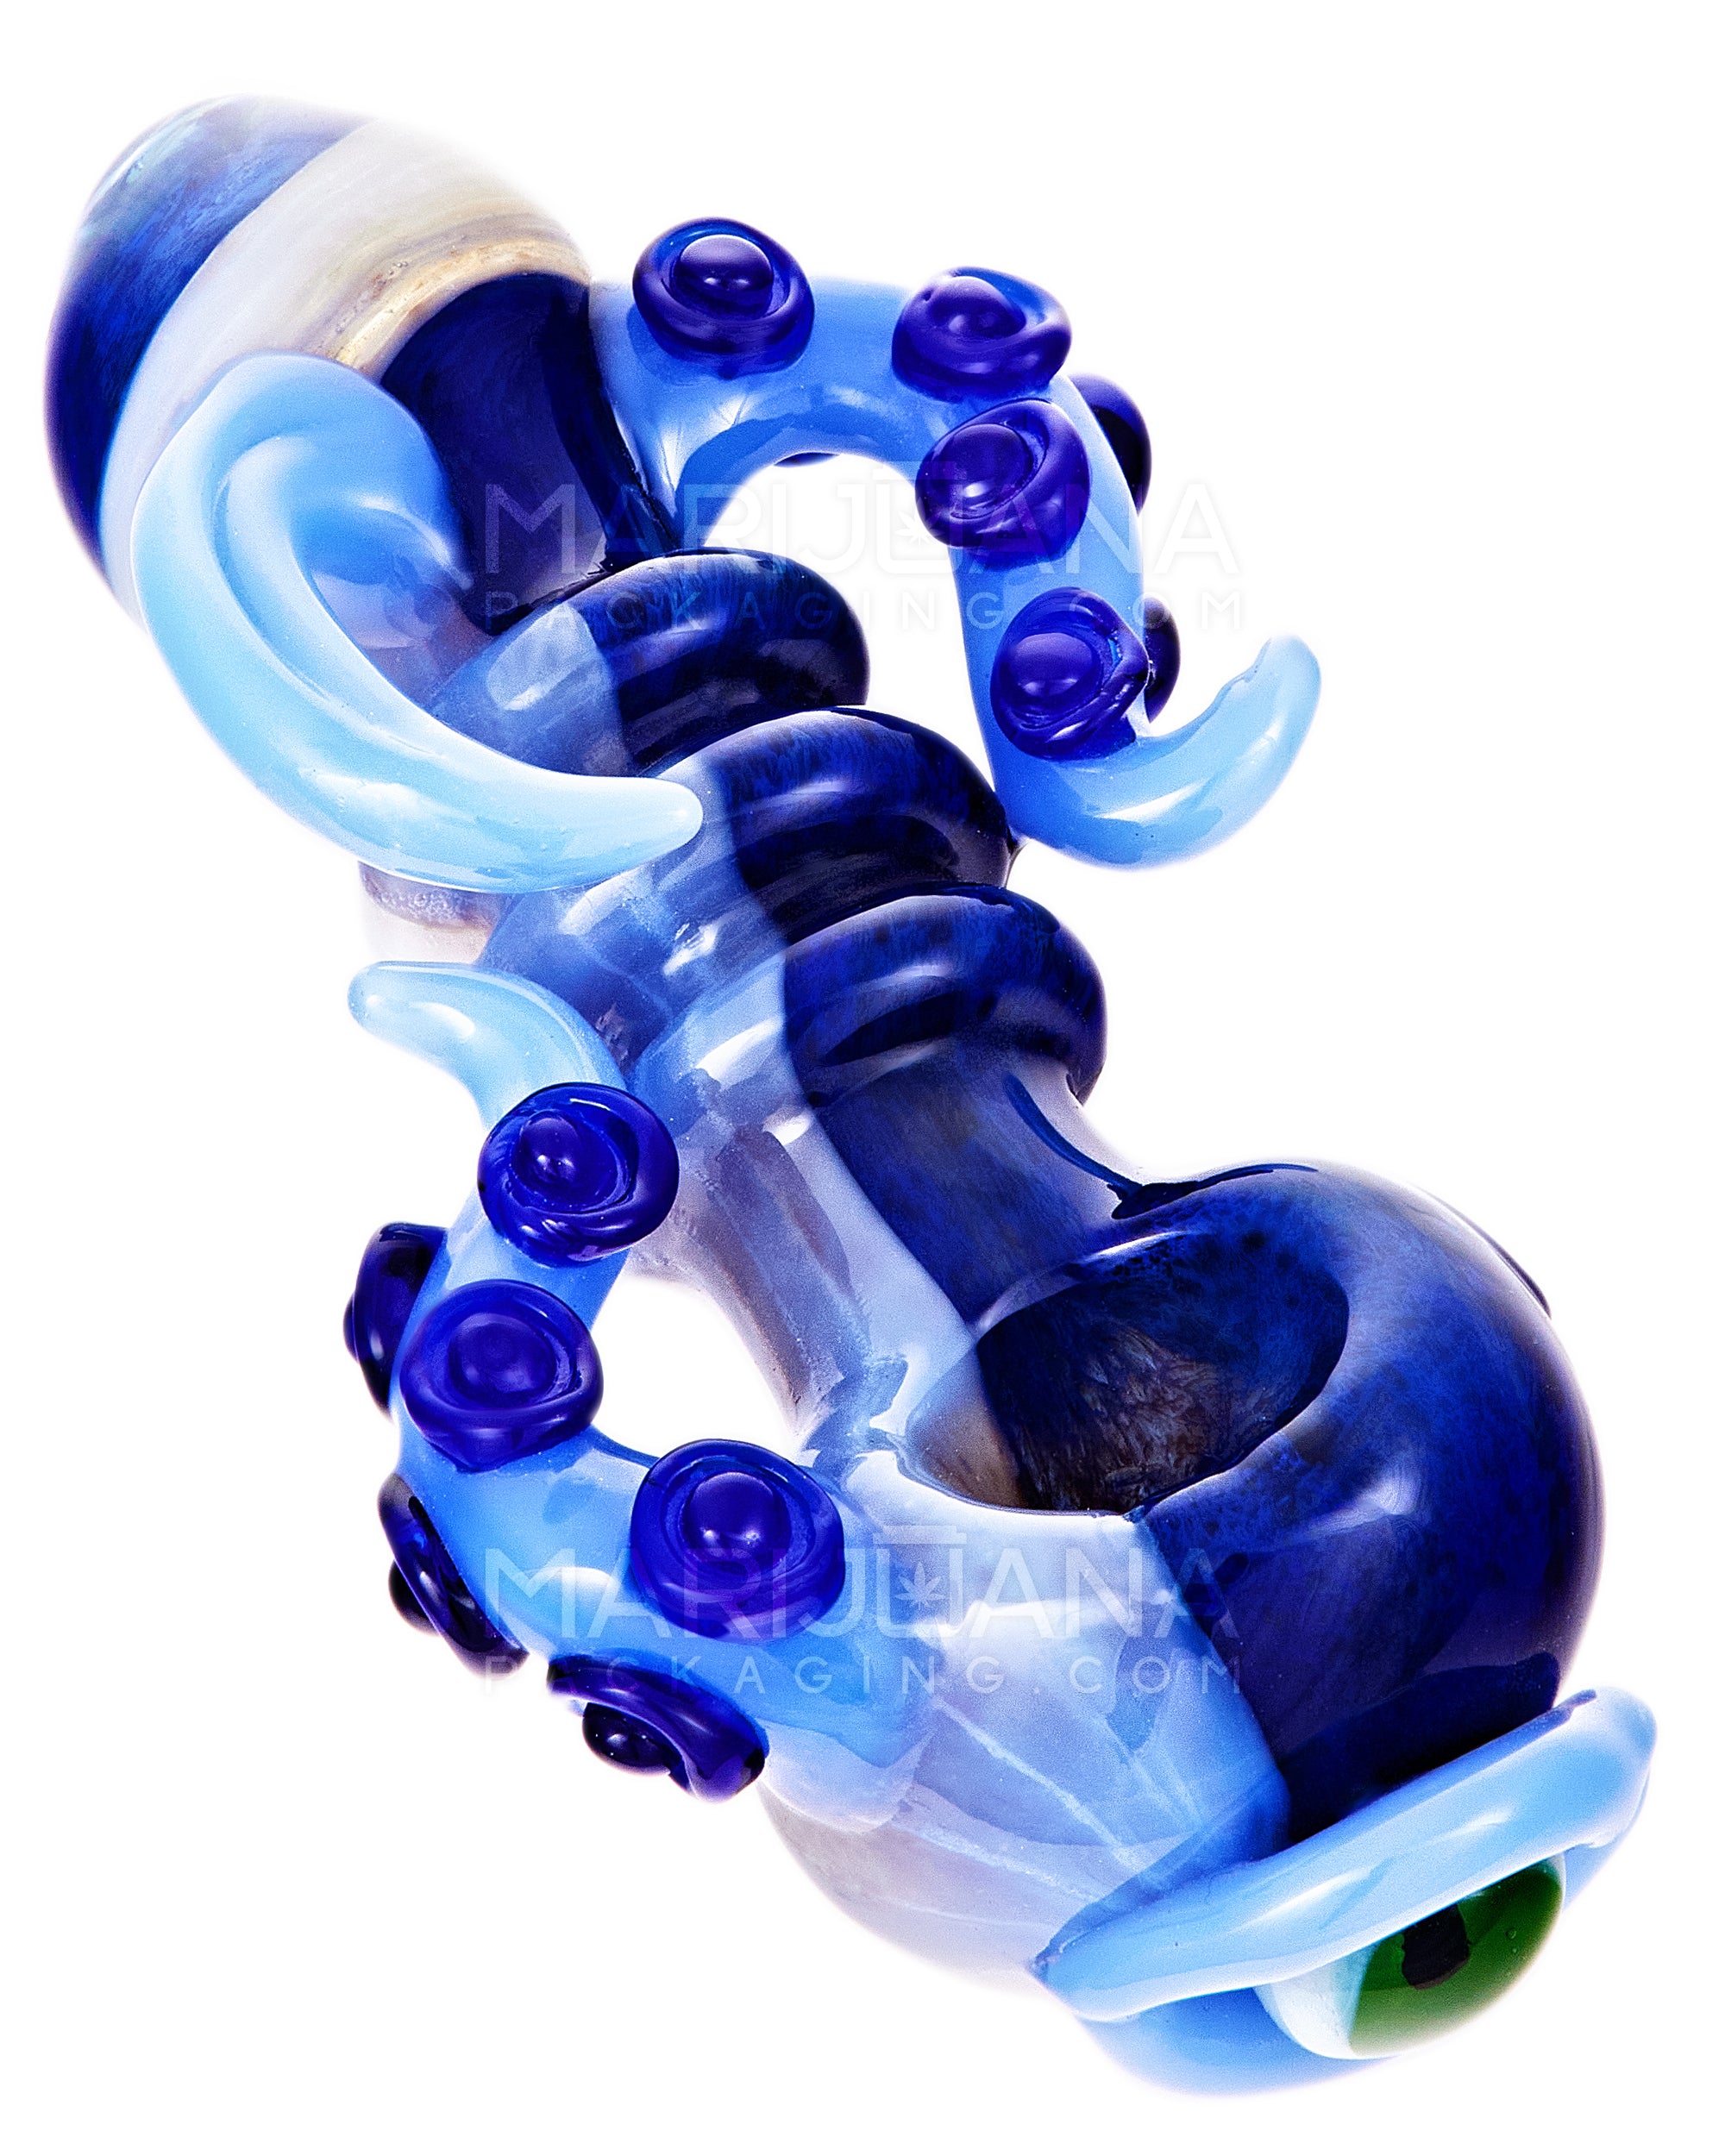 Heady | Triple Ringed Frit Kraken Spoon Hand Pipe w/ Marble Eye & Double Tentacles | 6in Long - Very Thick Glass - 8